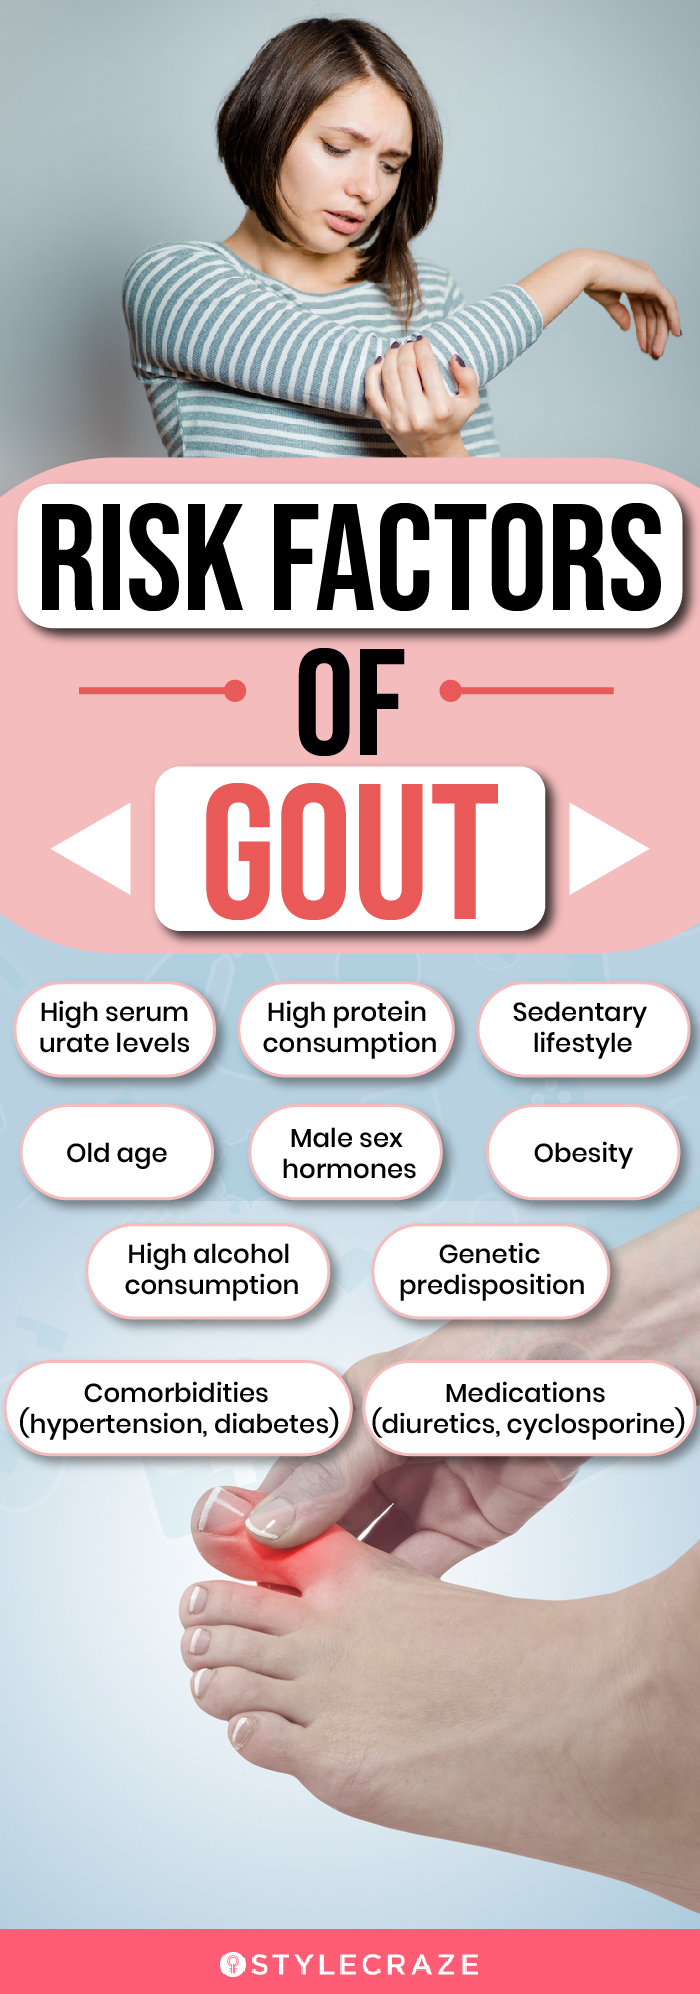 risk factors of gout (infographic)